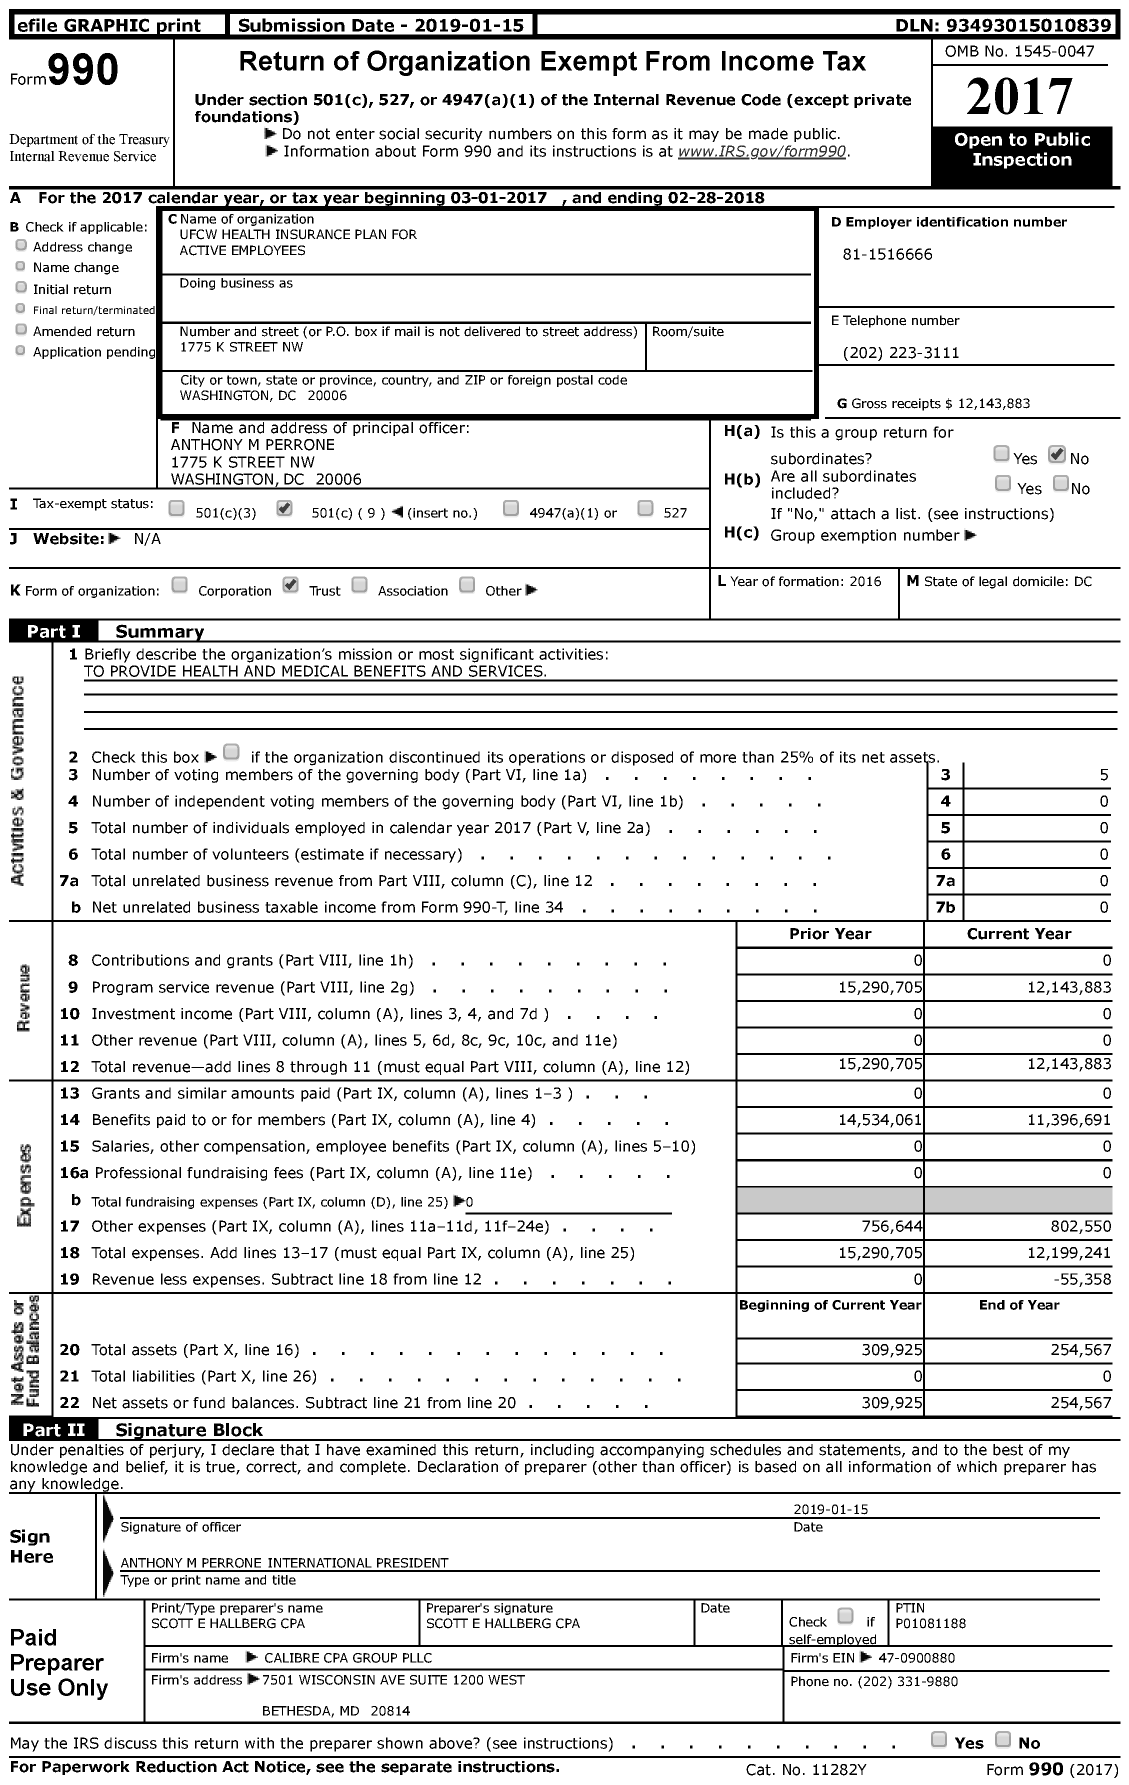 Image of first page of 2017 Form 990 for Ufcw Health Insurance Plan for Active Employees